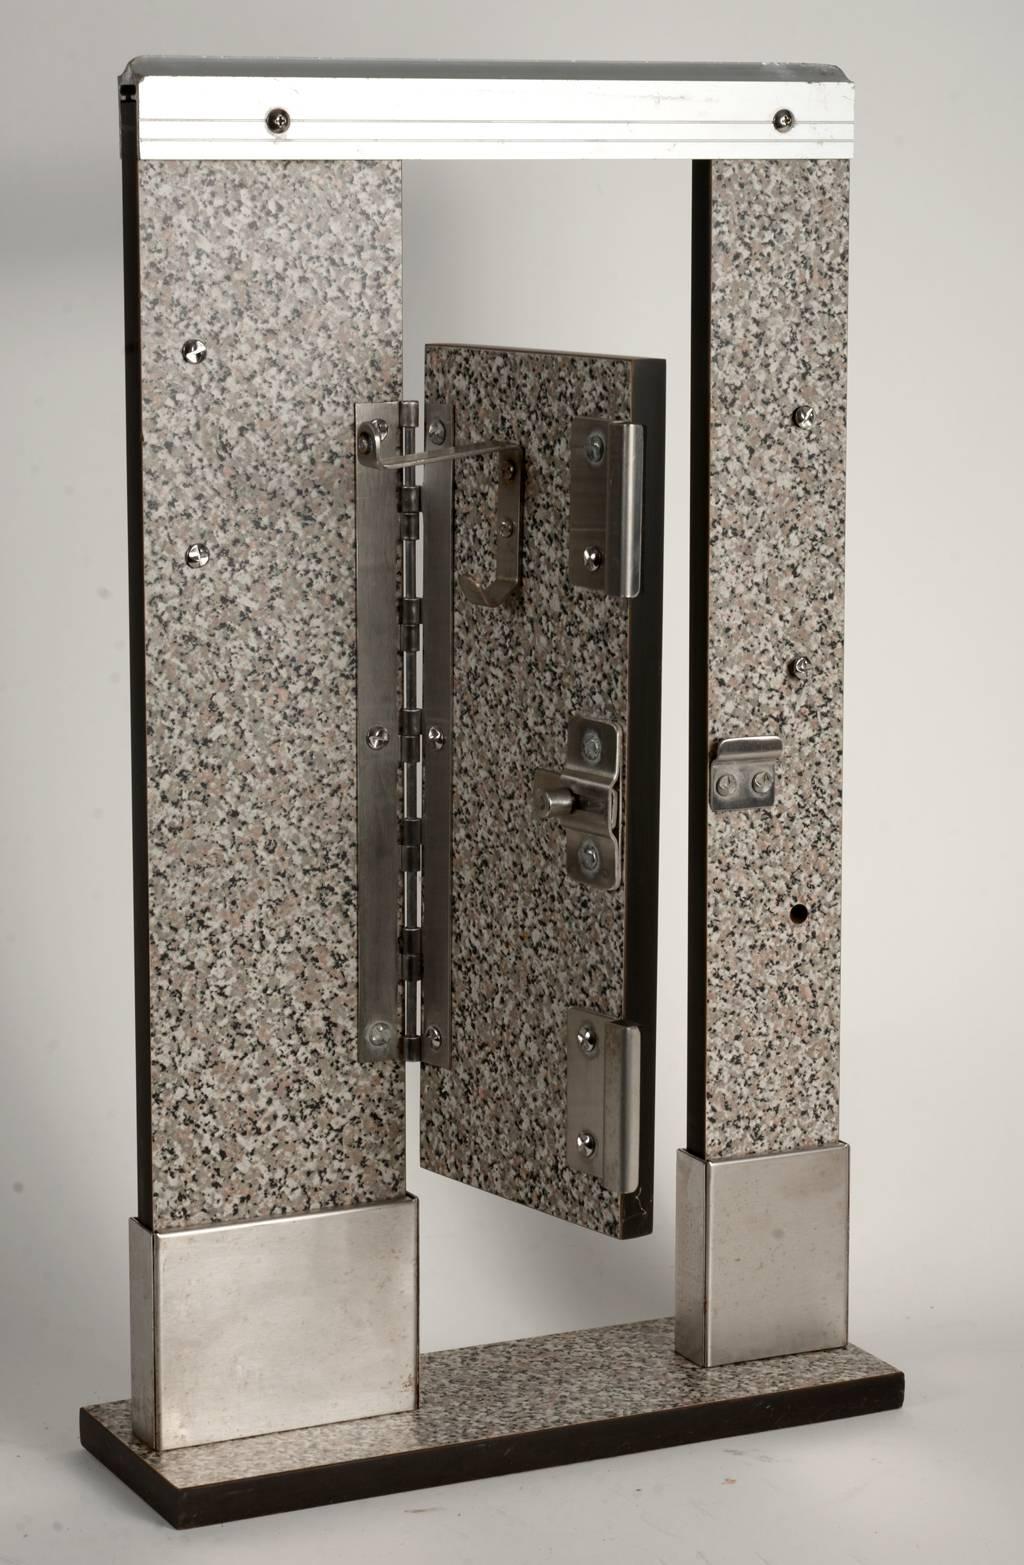 Single door toilet stall salesman's sample constructed out of formica with steel and aluminum detailing.